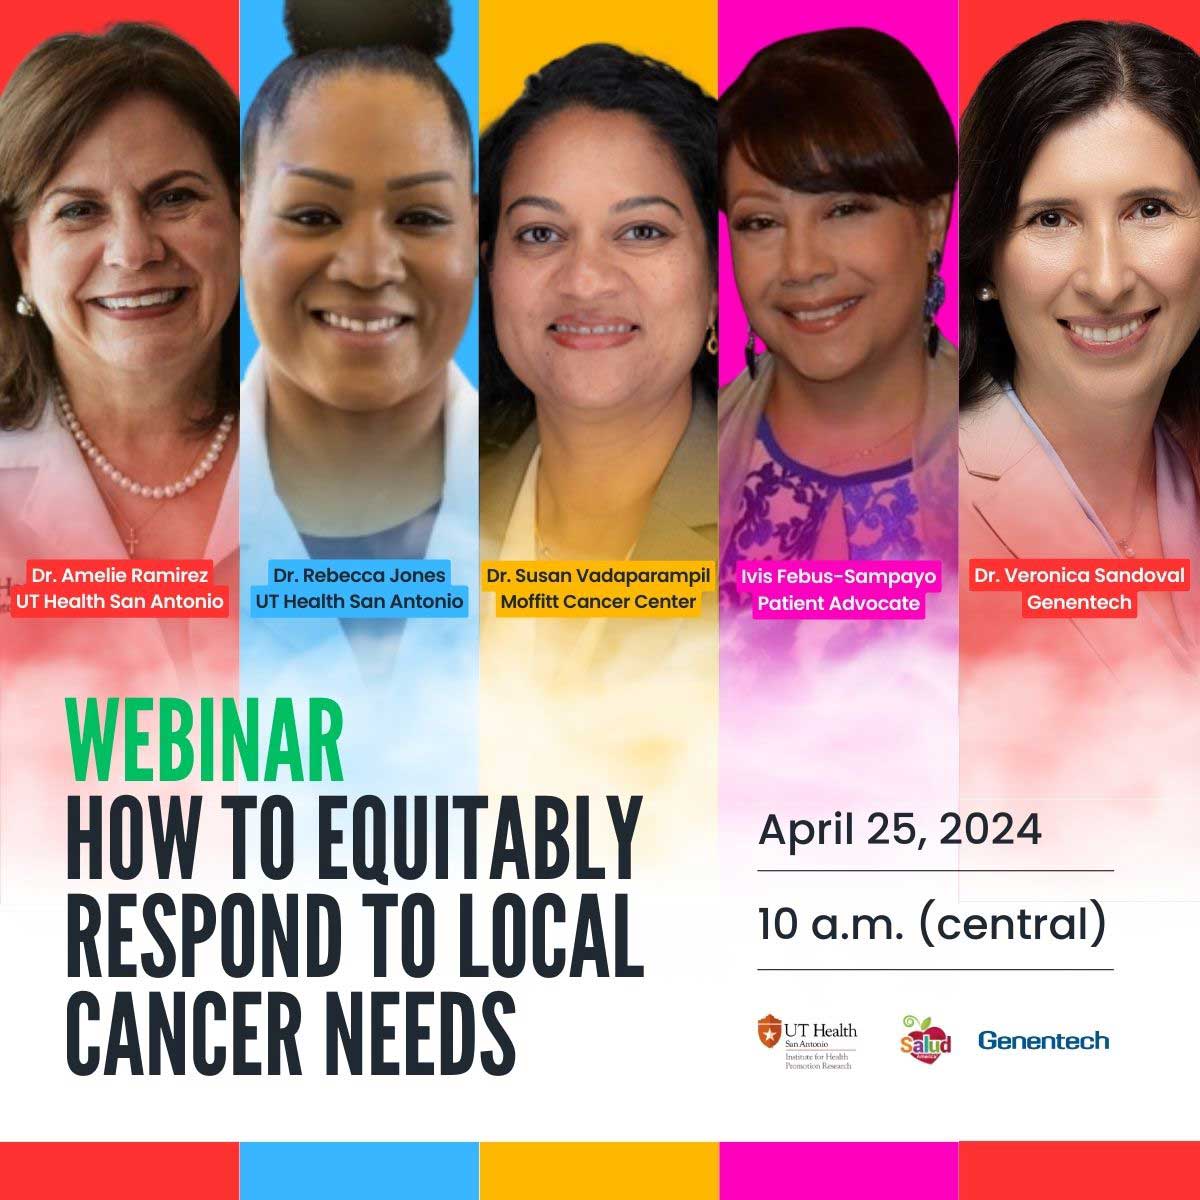 The cancer burden is not the same everywhere. Join our expert panelists TOMORROW, April 25 at 10 a.m., CT, to see how you can equitably identify and respond to your local cancer needs! 💪🏽 @UTHealthSAMDA @genentech @MoffittNews @SHARECancerSupt Register: bit.ly/equitywebevent